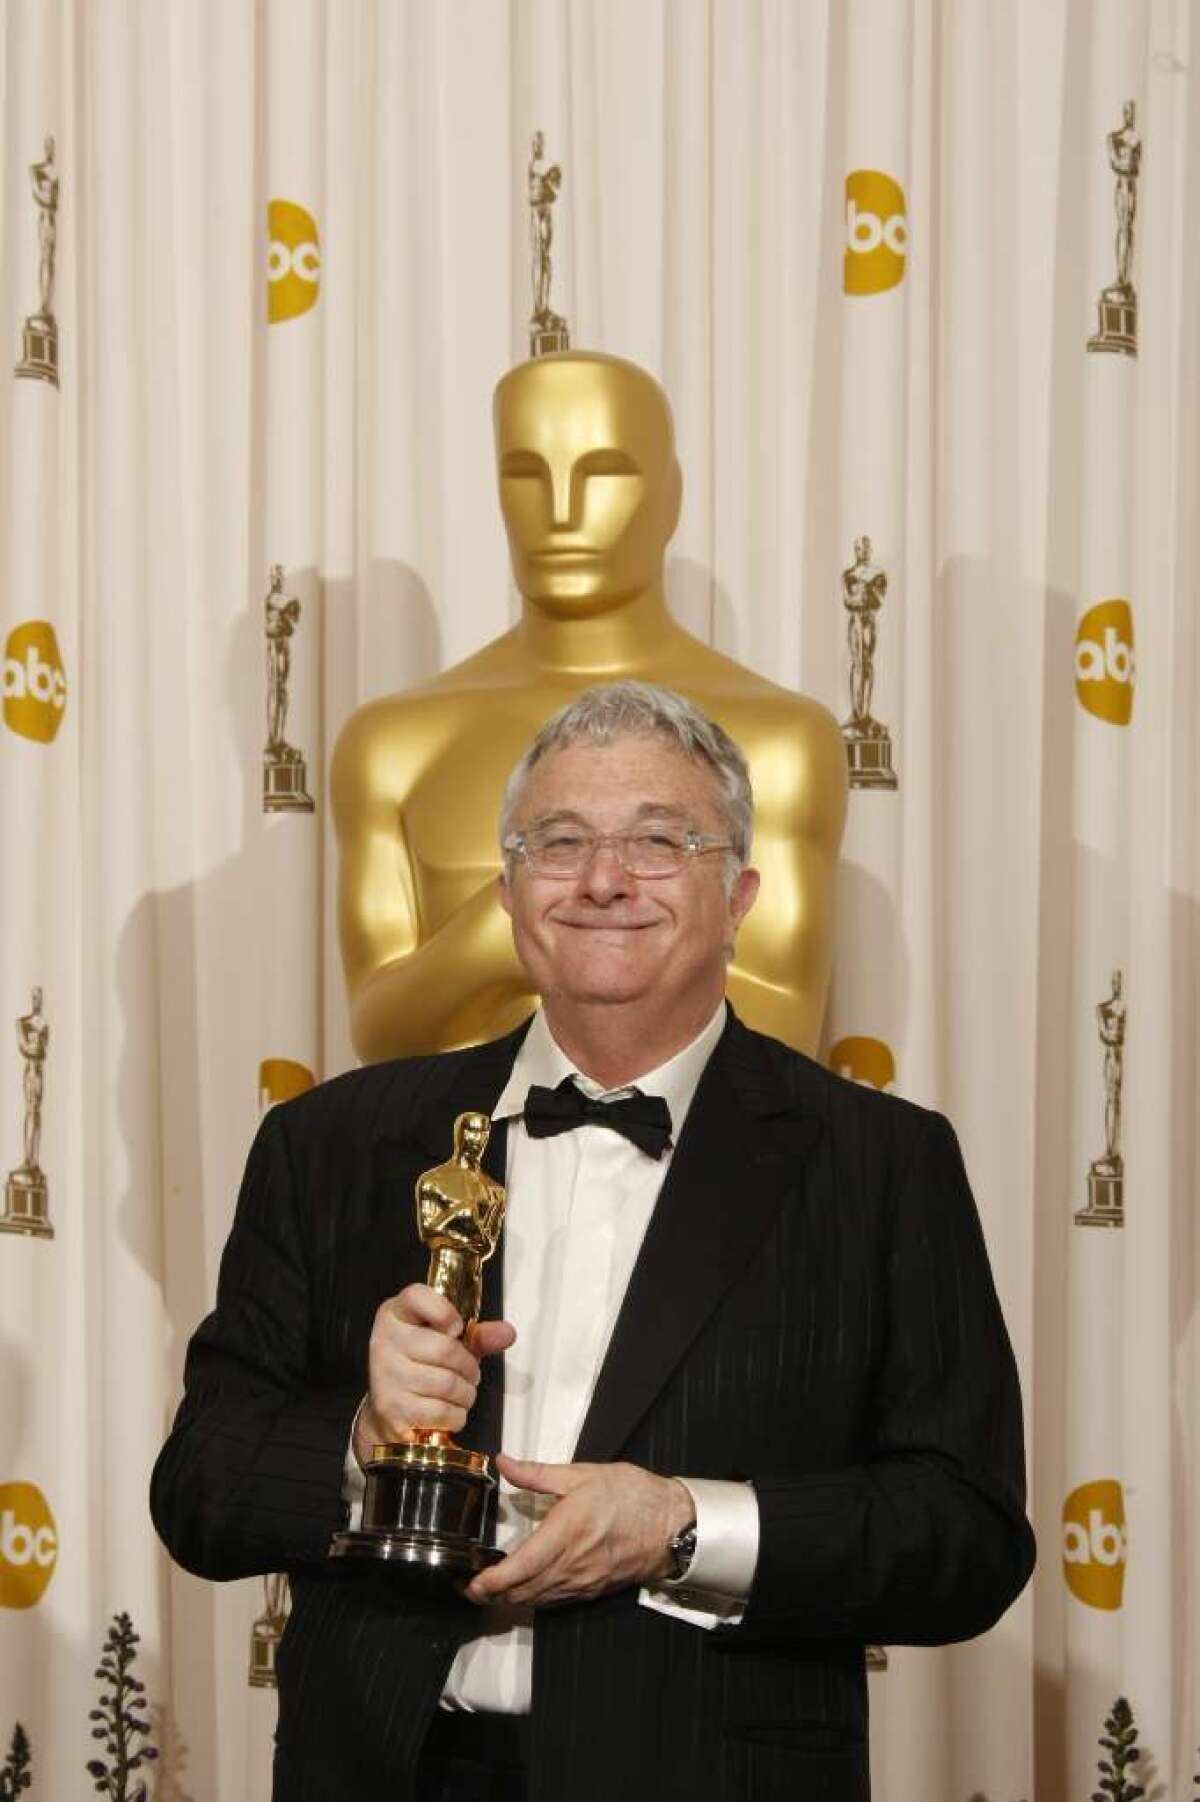 Newman won his second Academy Award in 2011 for best original song.